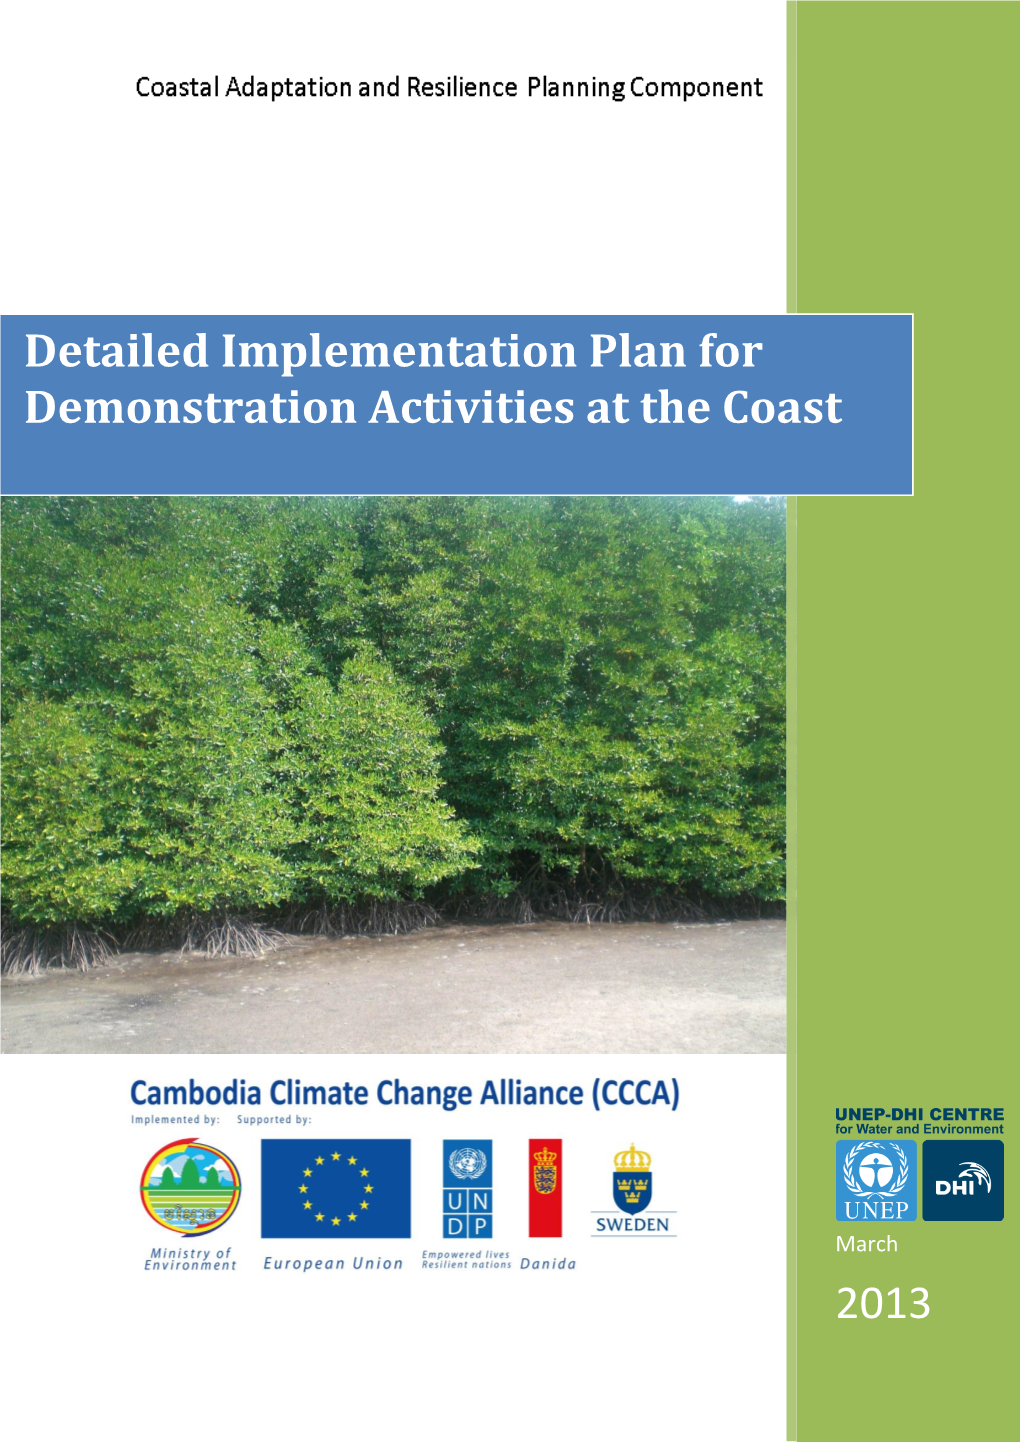 2013 Detailed Implementation Plan for Demonstration Activities at the Coast